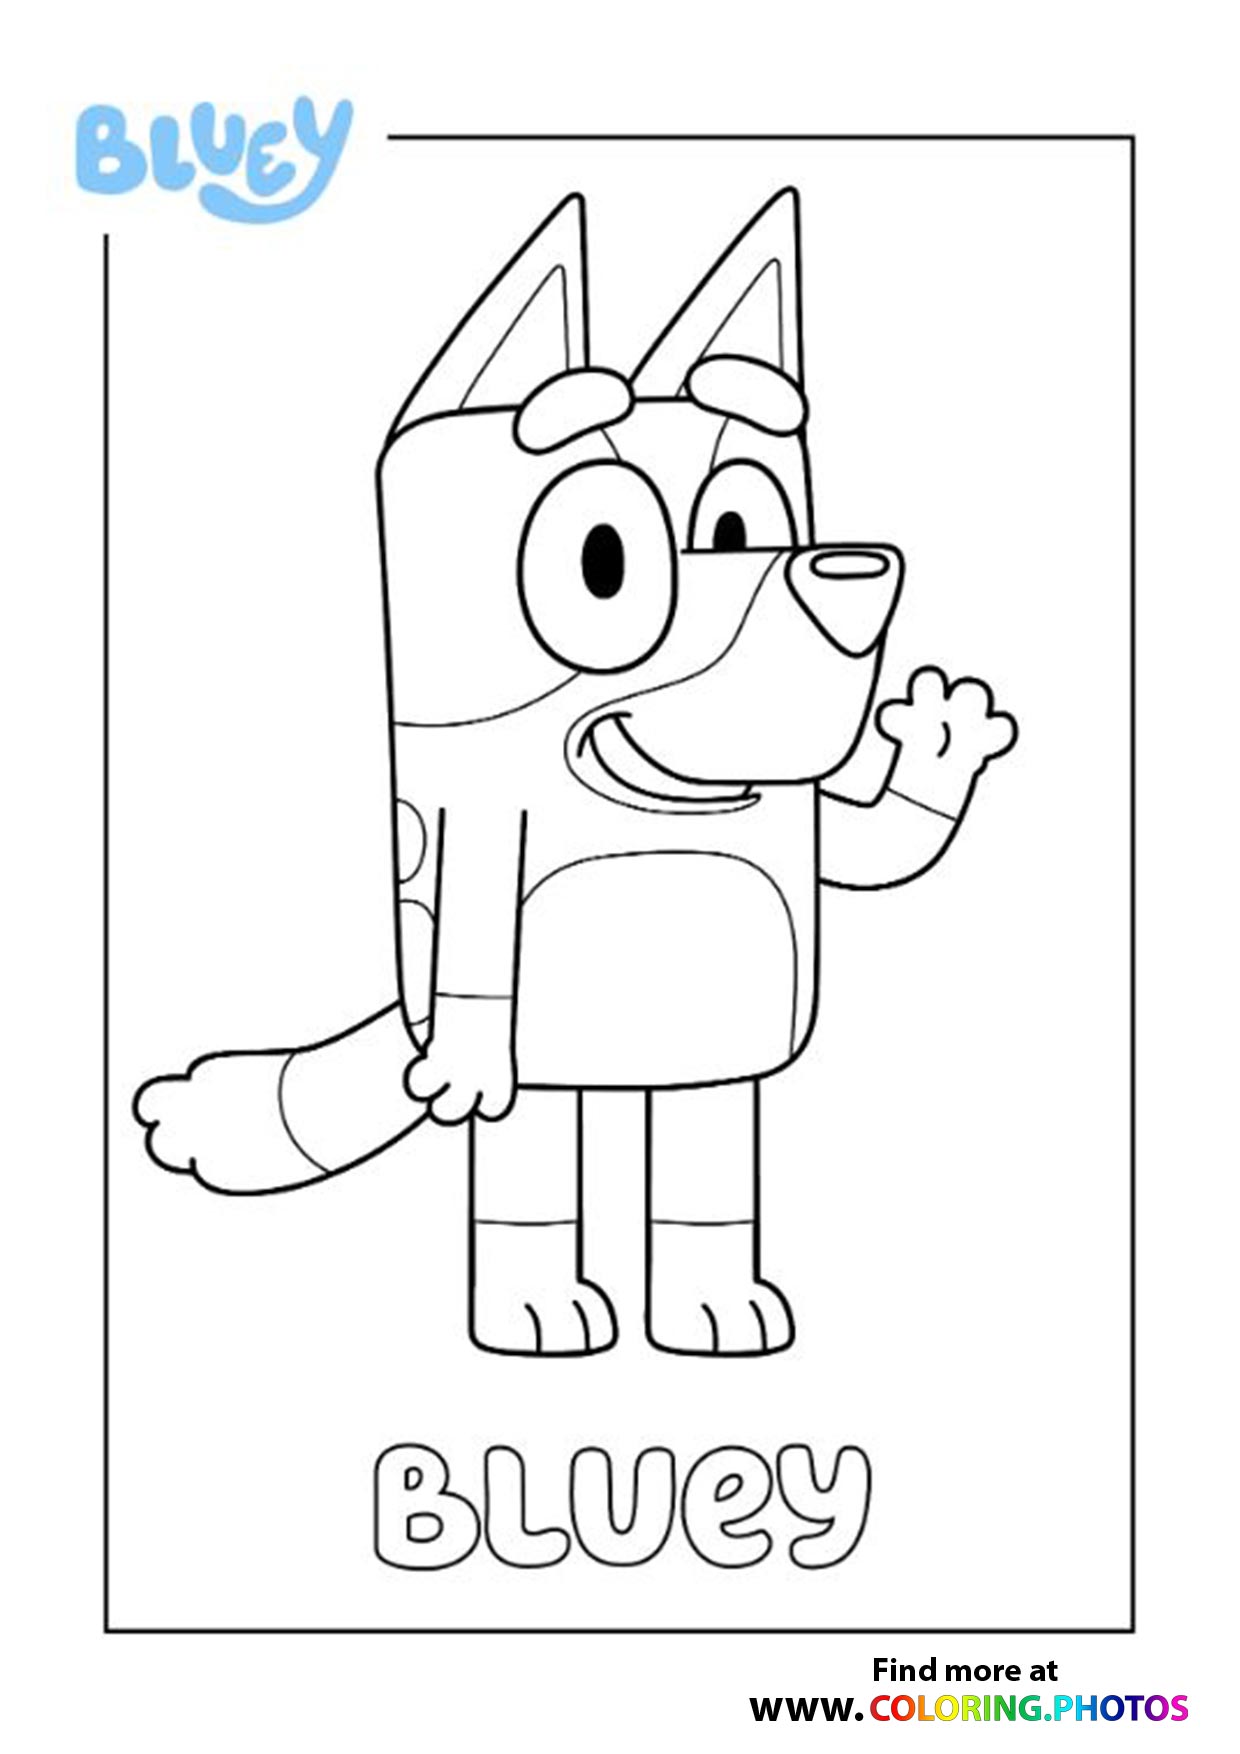 Bluey   Coloring Pages for kids